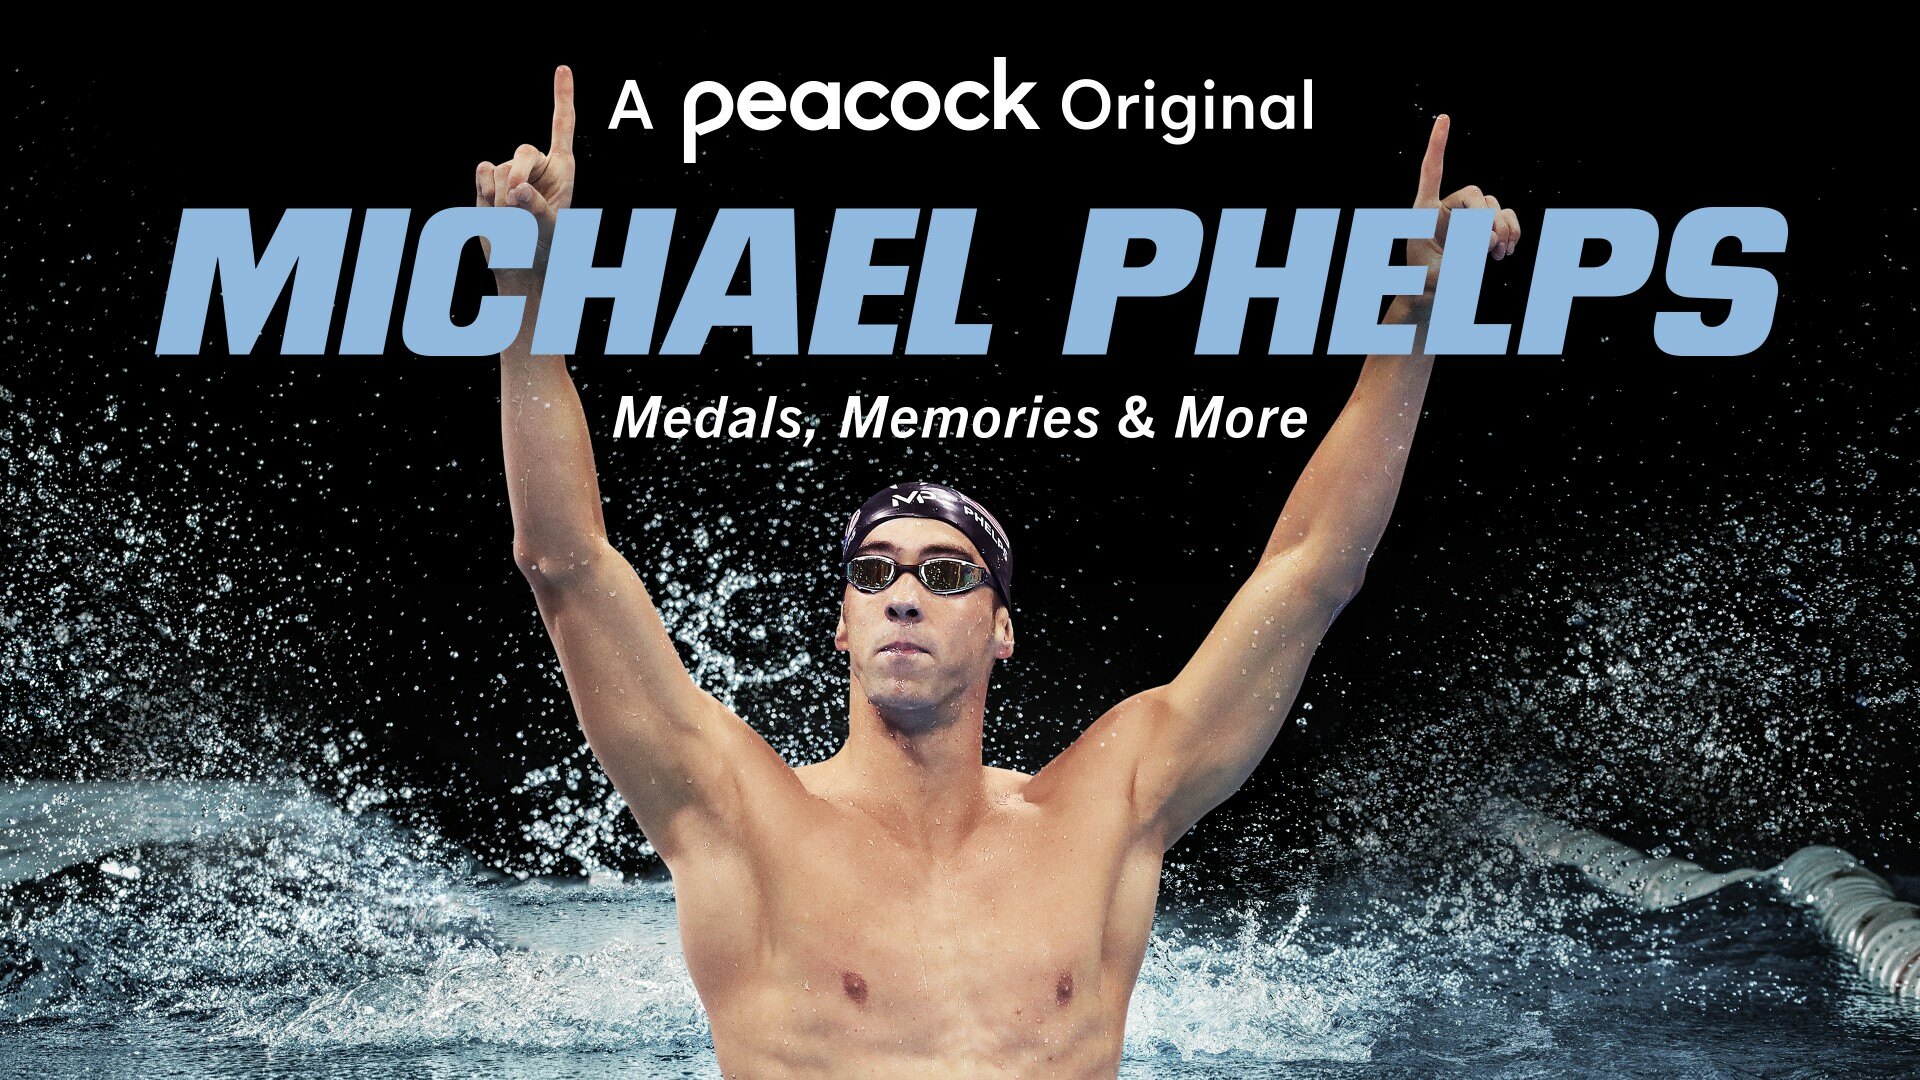 Michael Phelps Medals, Memories & More countdown how many days until